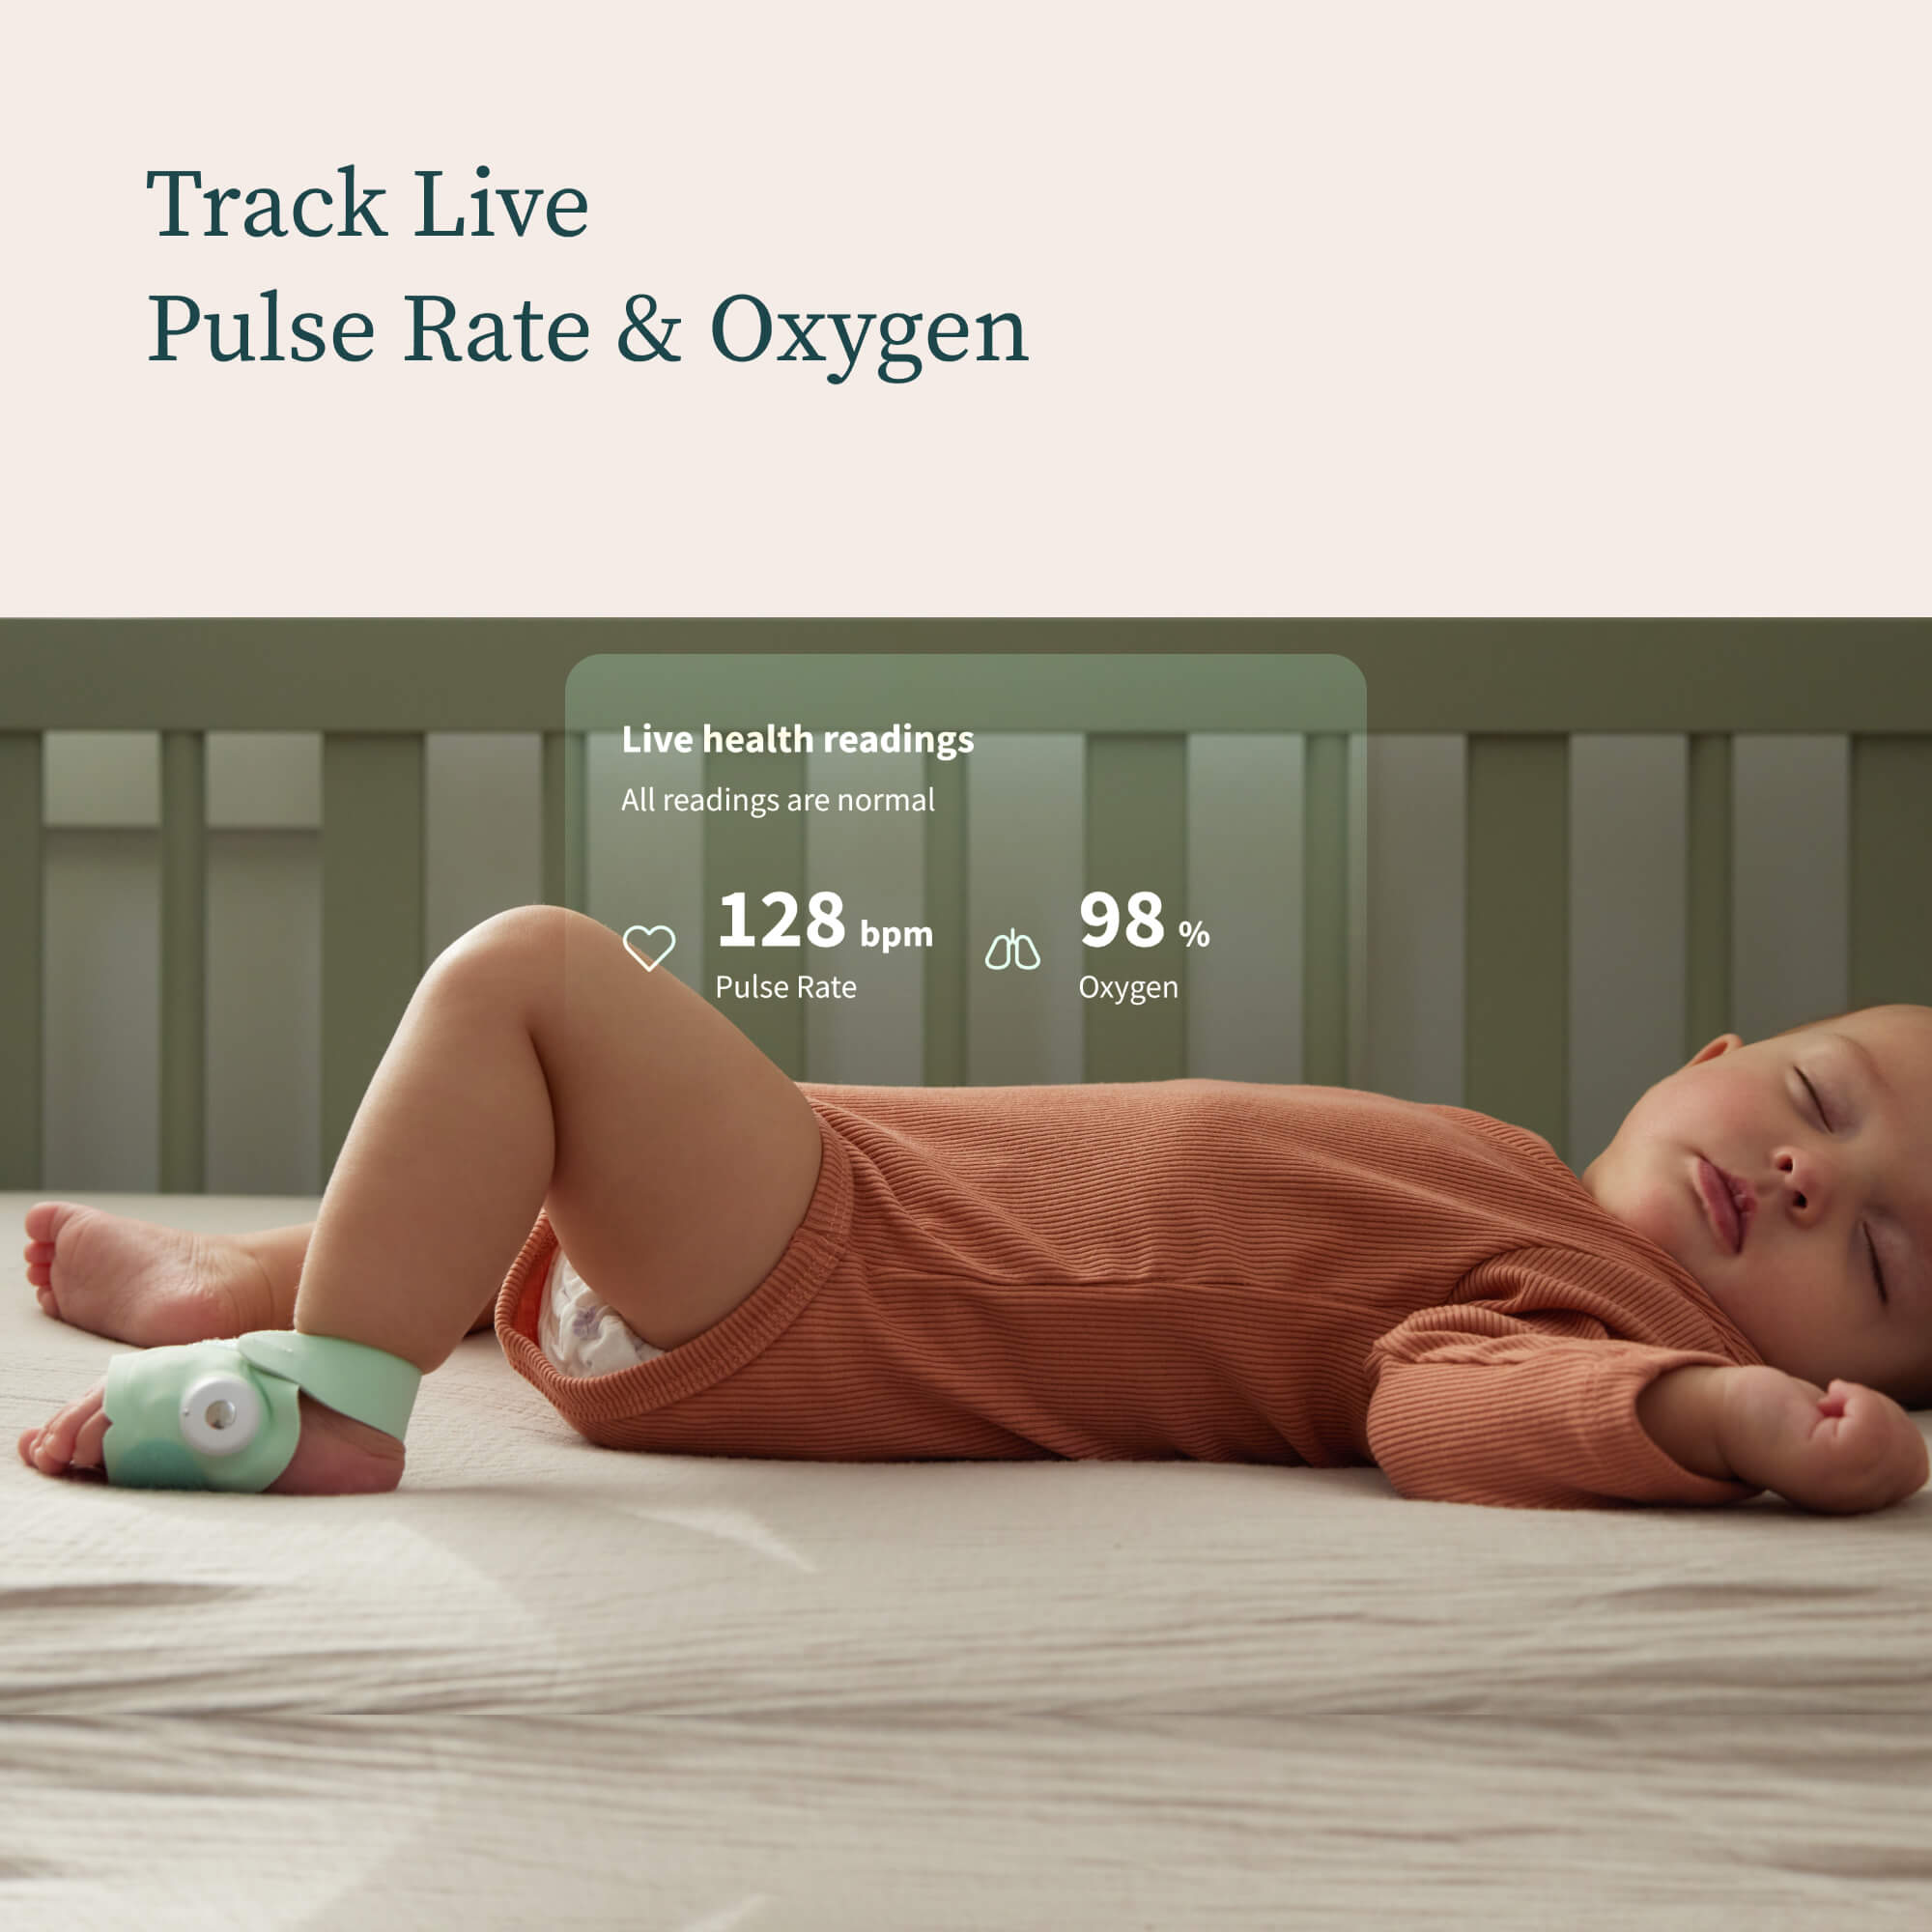 Track live pulse rate and oxygen